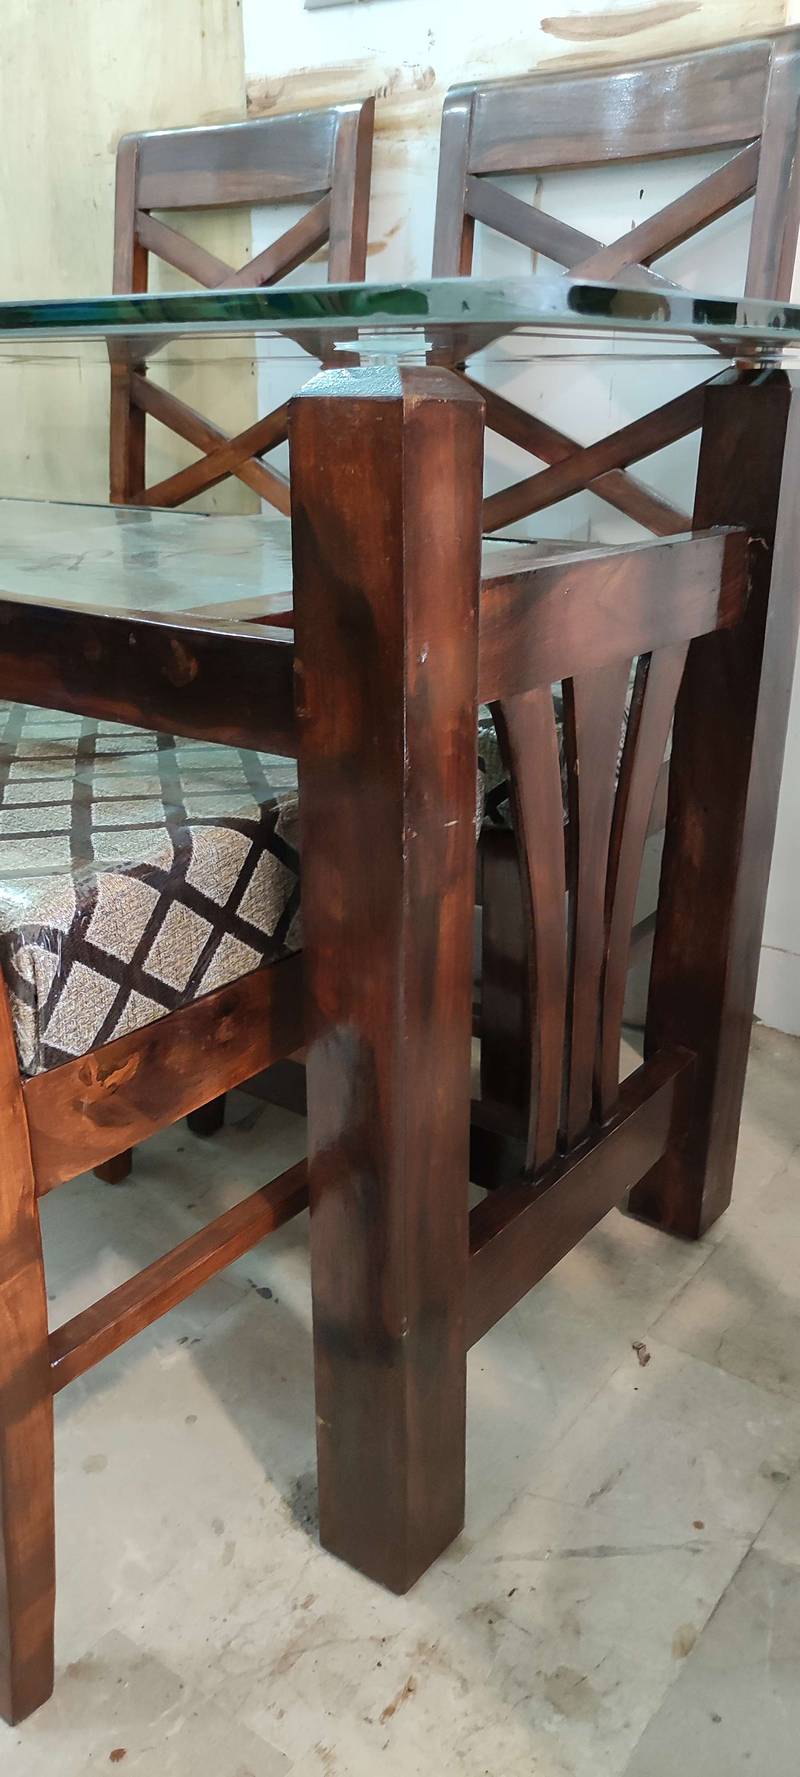 6 CHAIR DINING TABLE SHISHAM WOODEN (NEW) NOT USE. 10